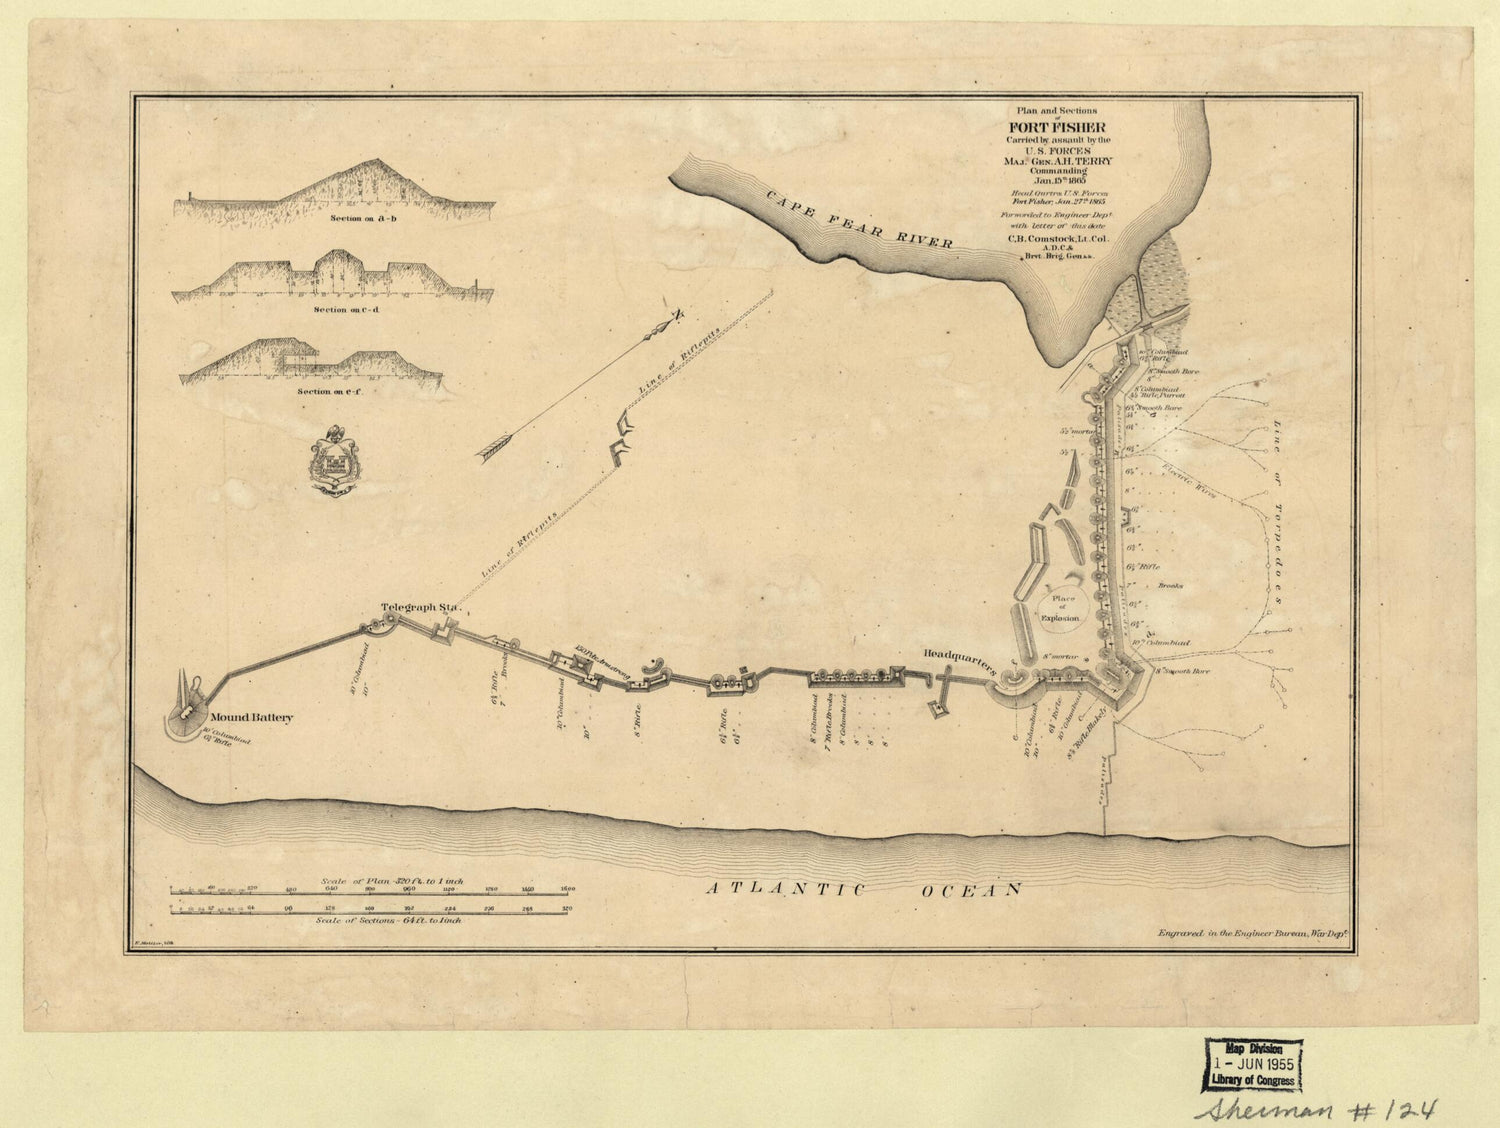 This old map of Plan and Sections of Fort Fisher, Carried by Assault by the U.S. Forces, Maj. Gen. A.H. Terry Commanding, Jan. 15th, from 1865 was created by C. B. (Cyrus Ballou) Comstock, E. Molitor, O. M. (Orlando Metcalfe) Poe,  United States. War Dep